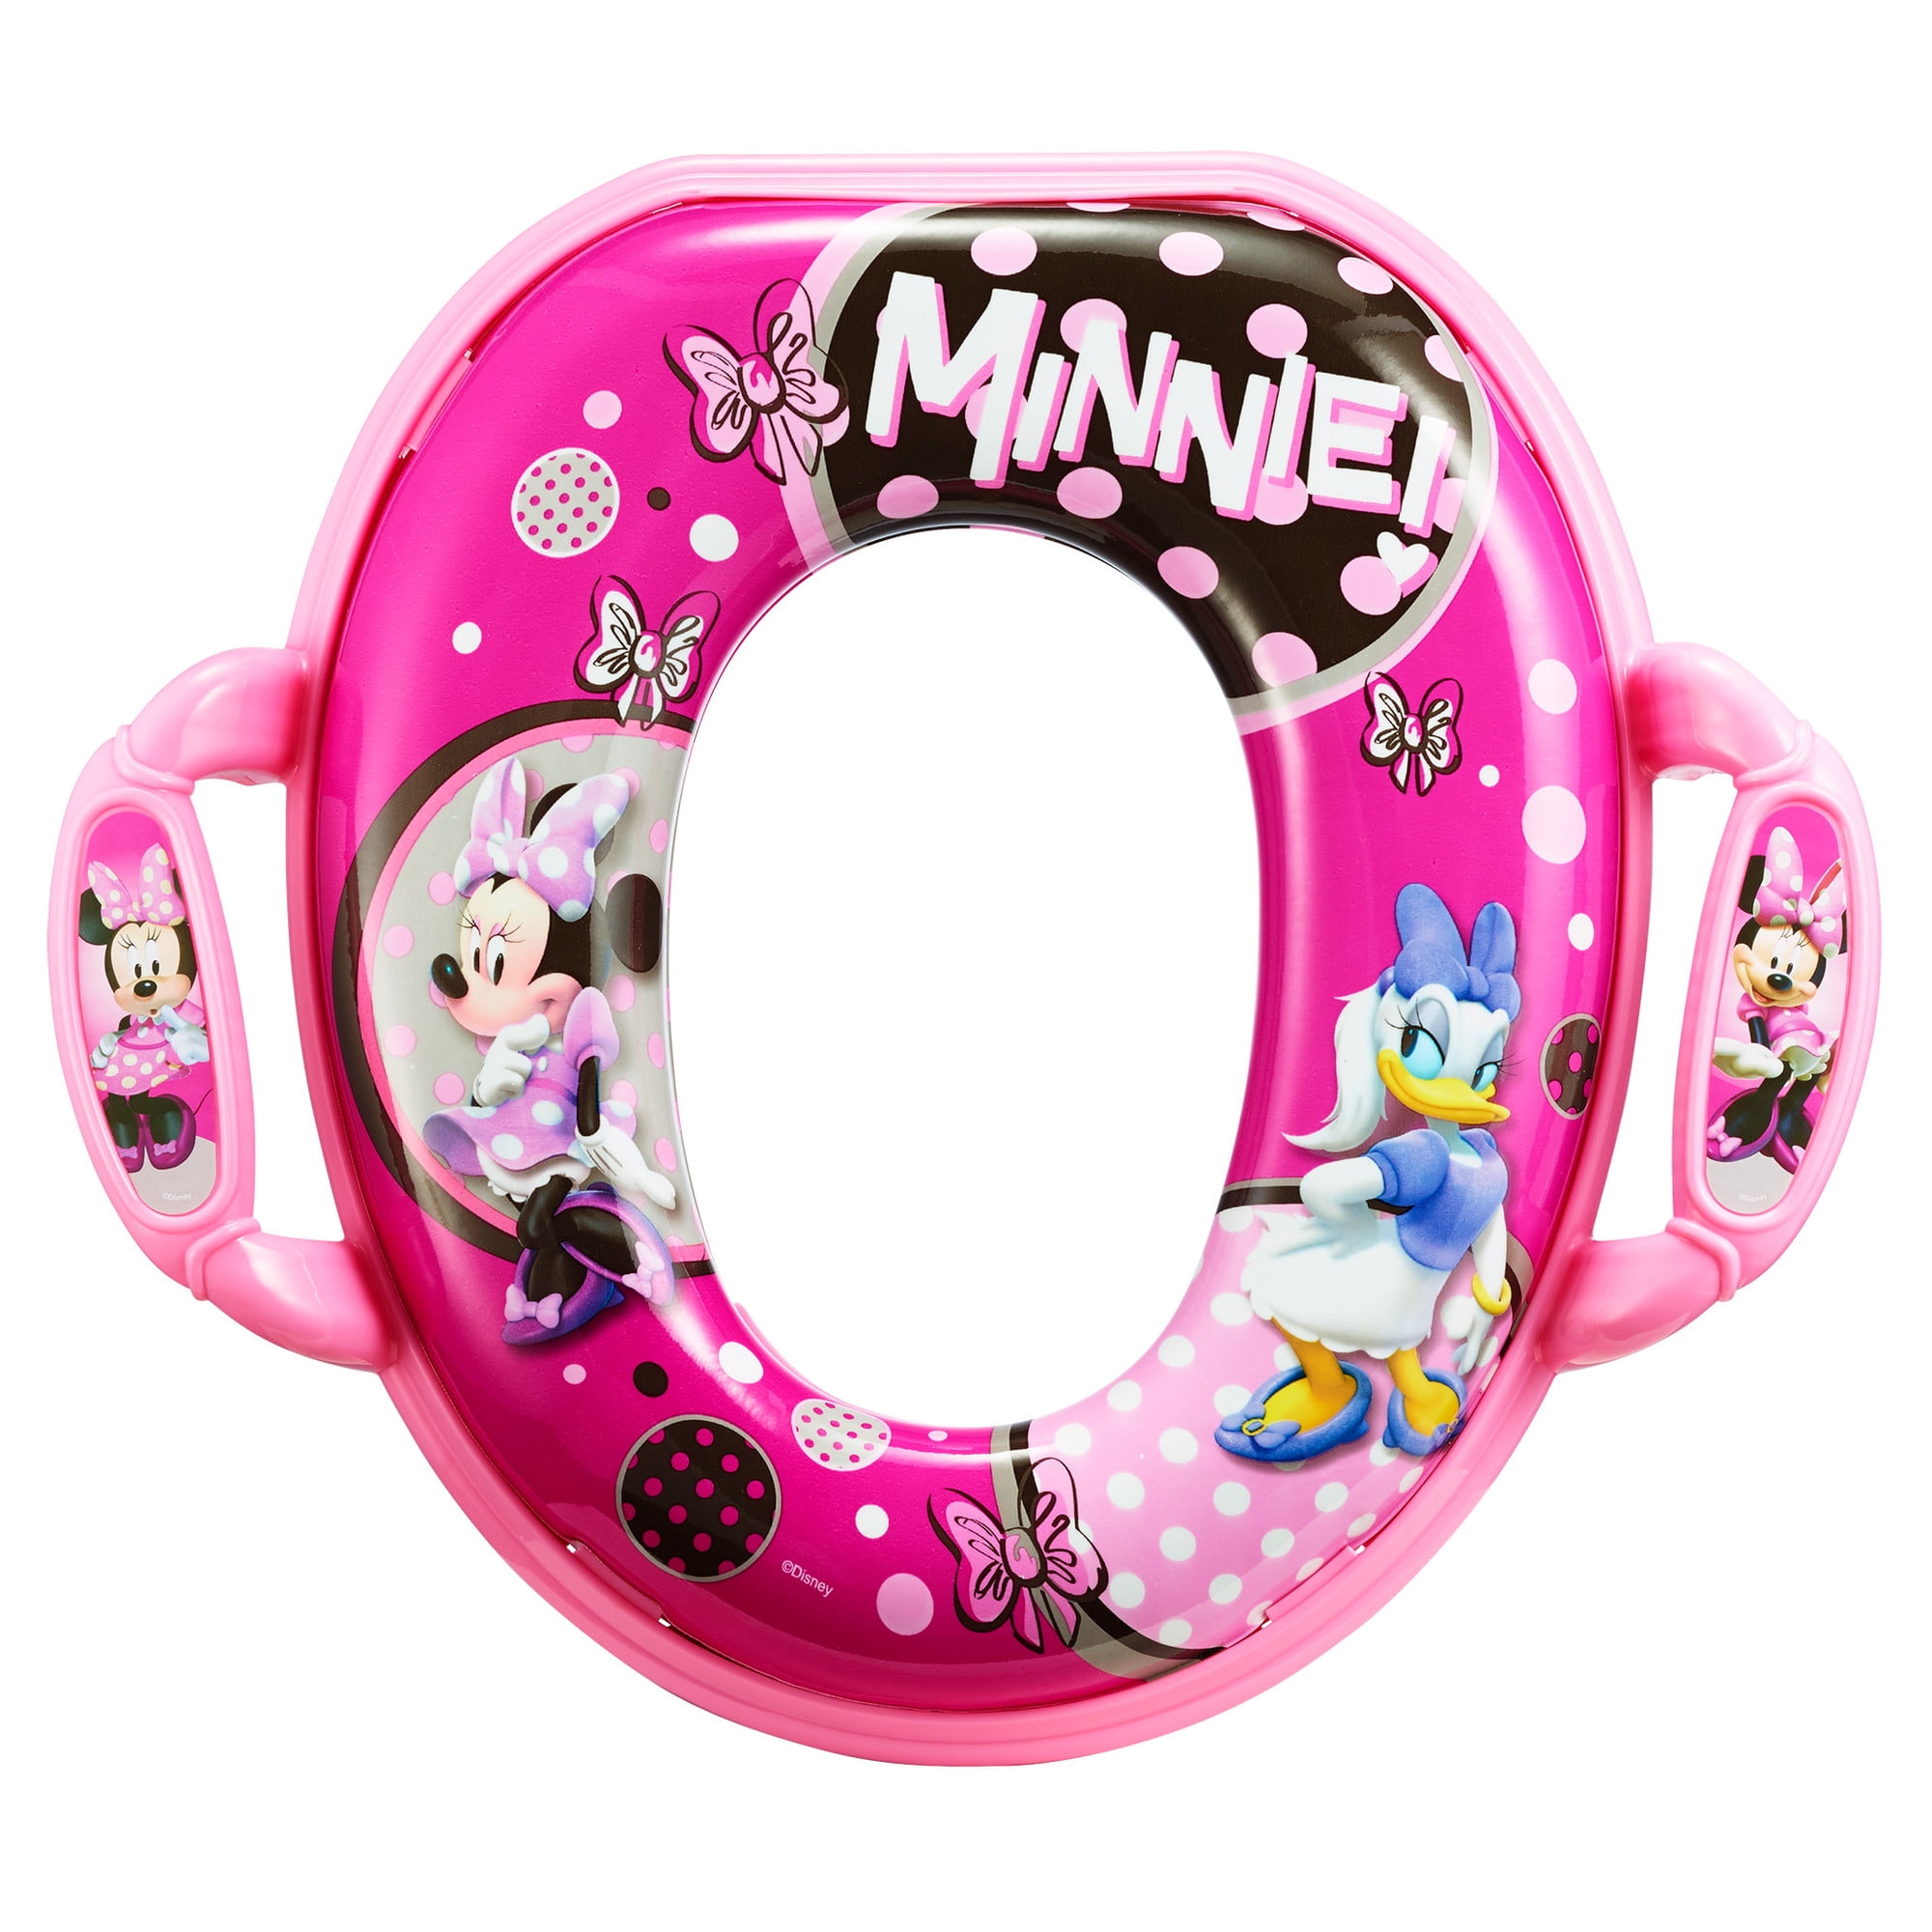 The First Years Disney Minnie Mouse Soft Potty Seat With